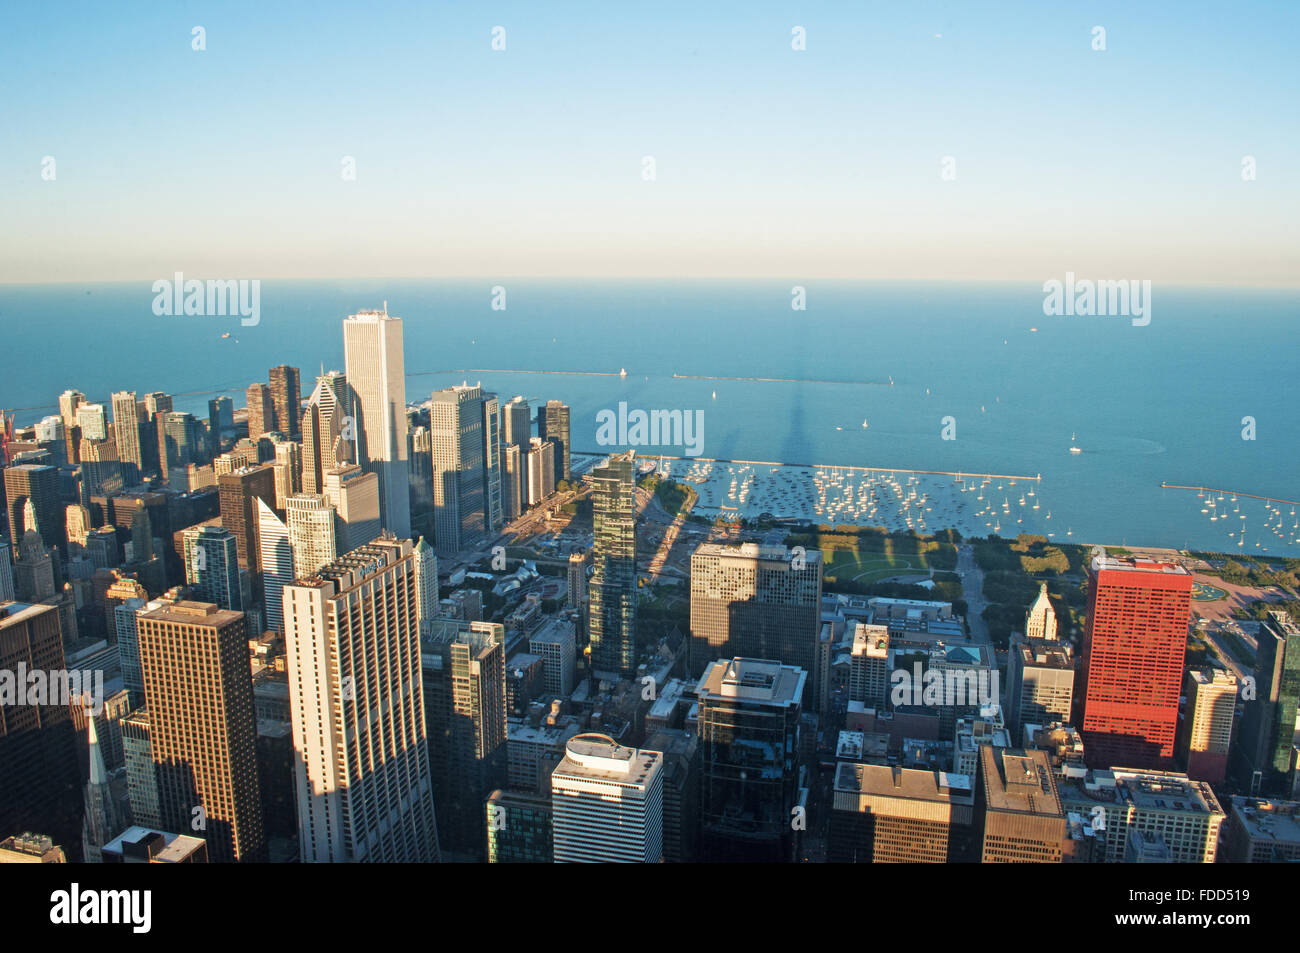 Chicago, Illinois, United States of America: skyline at sunset seen through the glass of the Willis Tower observation deck Stock Photo